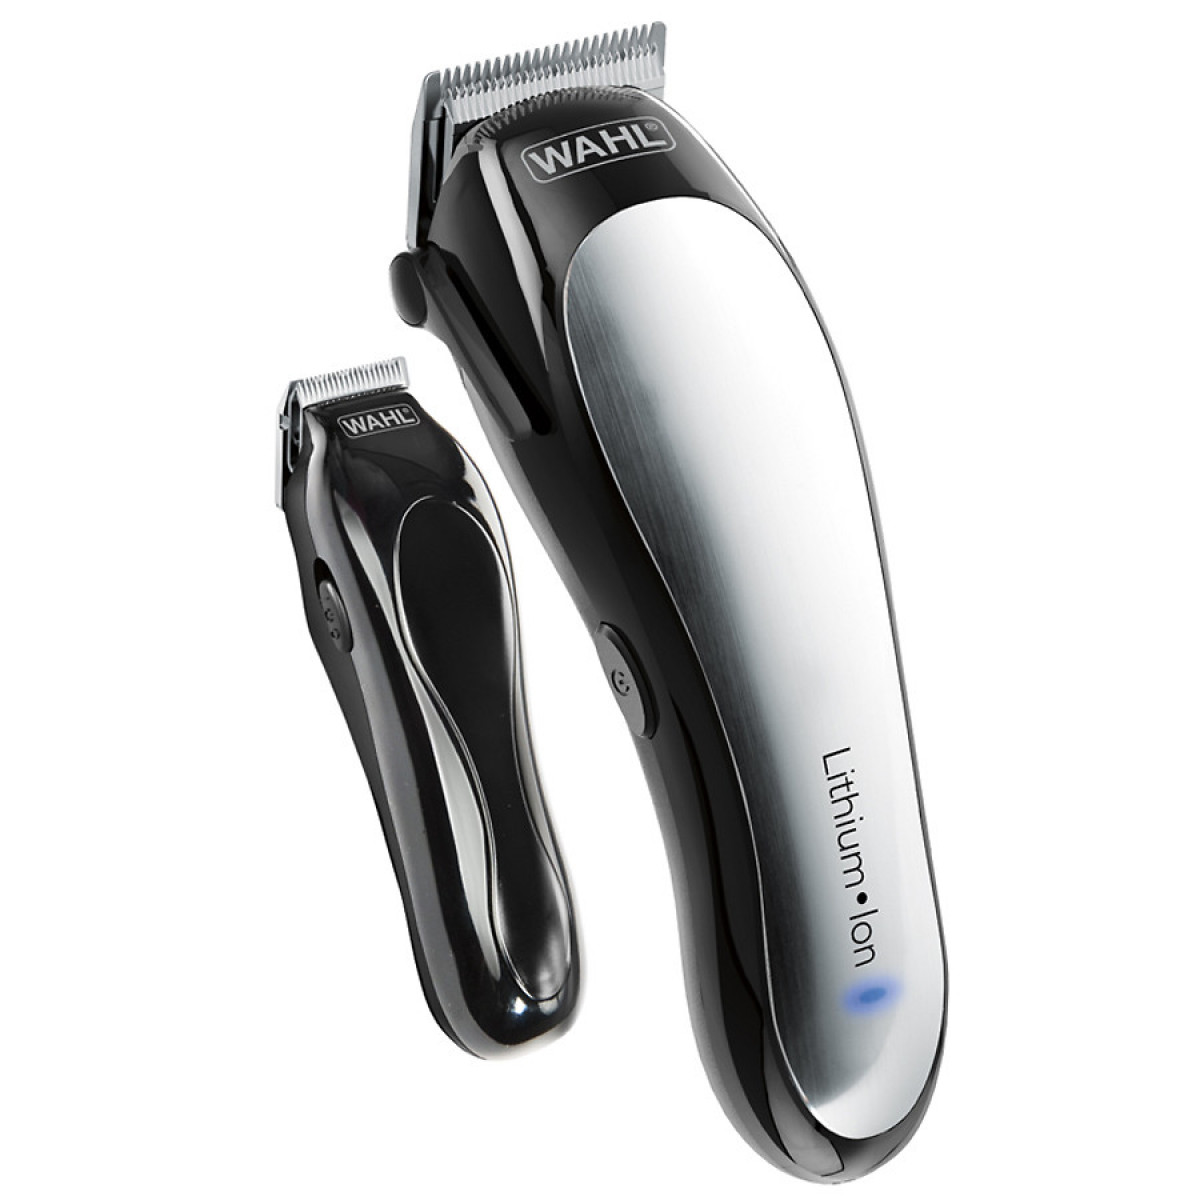 lithium ion wahl clipper